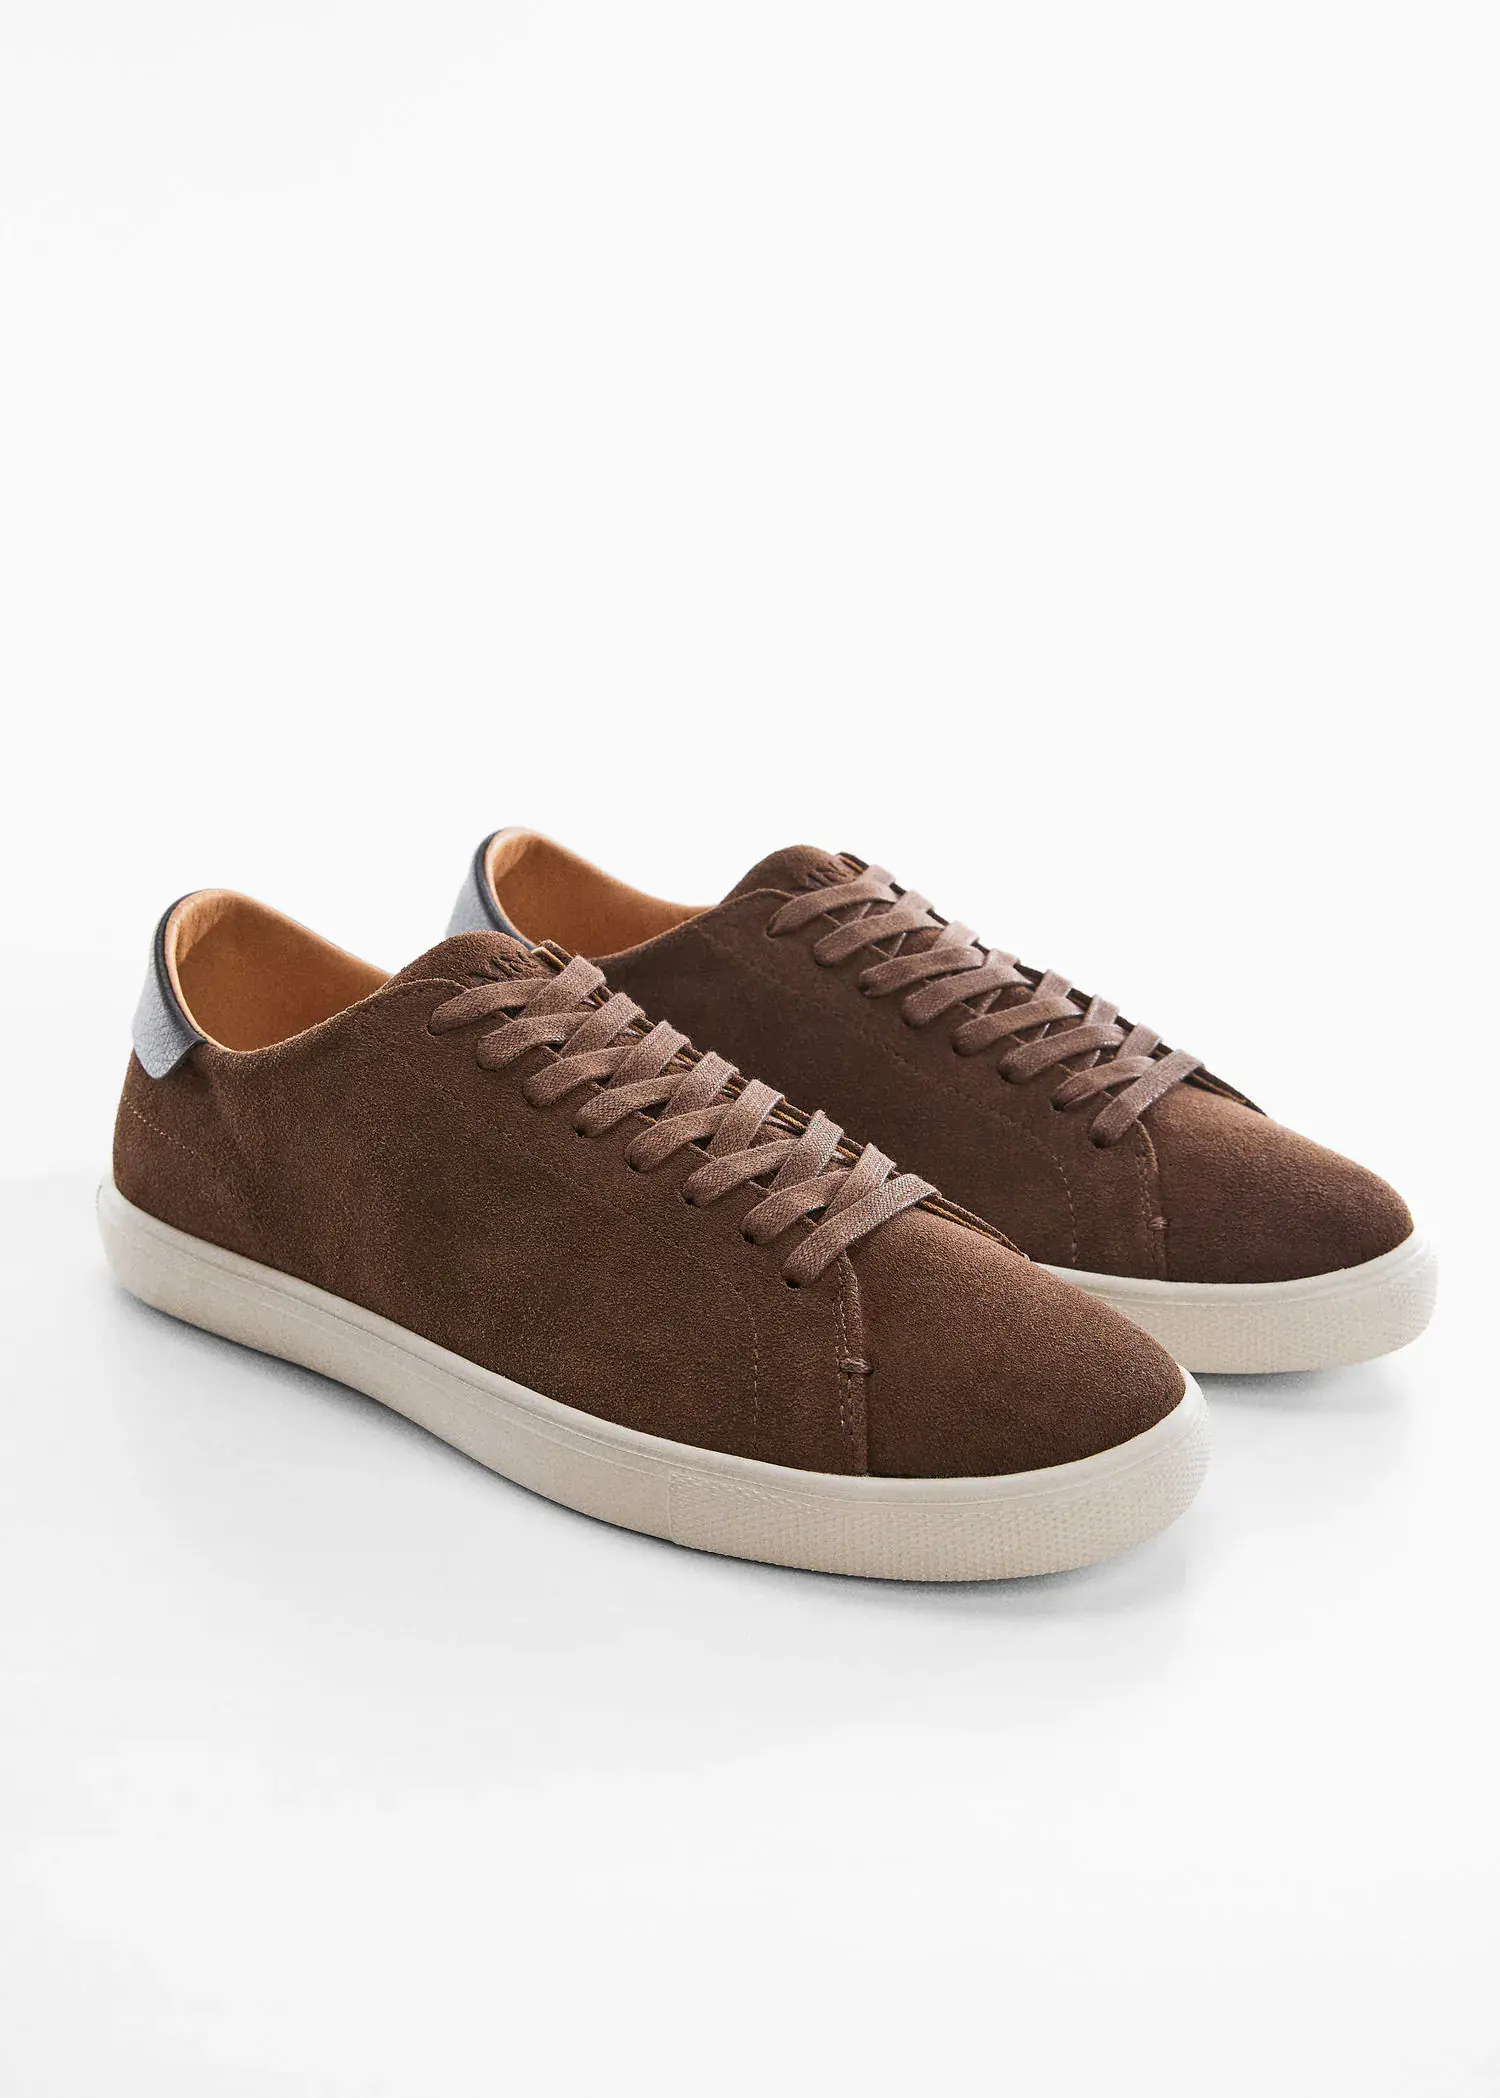 Mango Laces suede sneaker. a pair of brown sneakers on a white surface. 